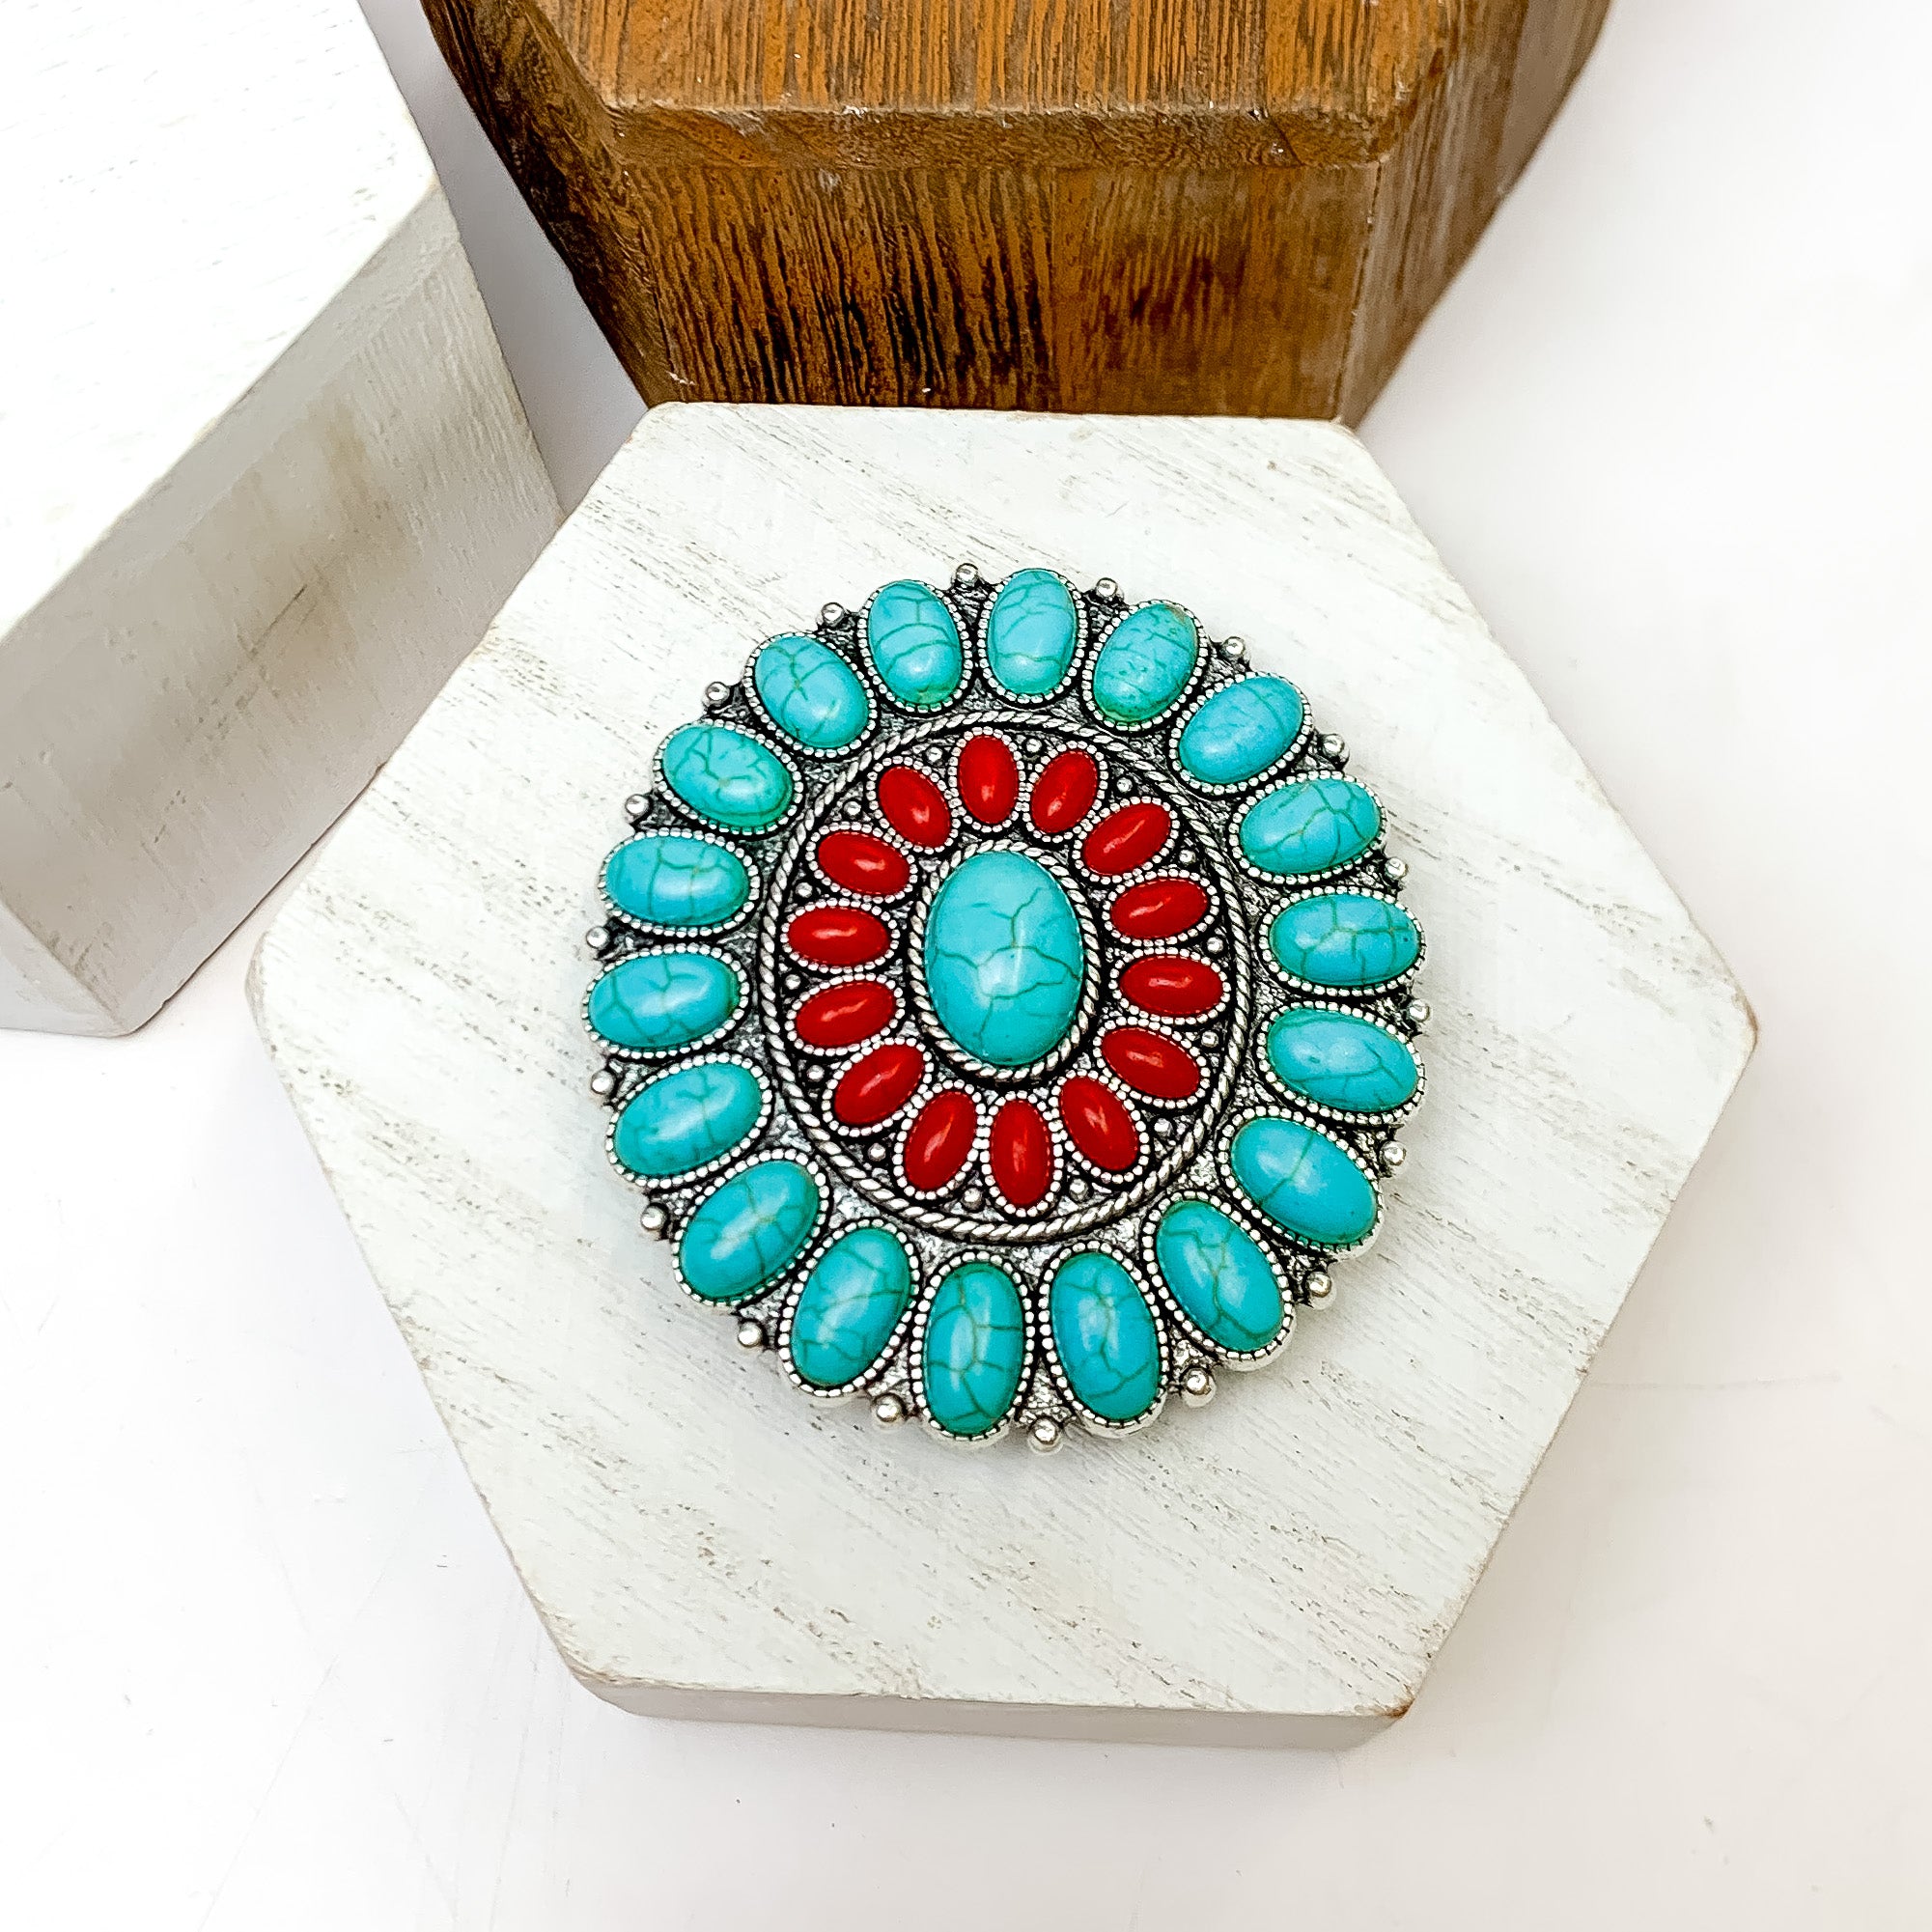 Silver Tone With Turquoise and Red Stone Circle Phone Grip. This phone grip is pictured on a white block with a white background behind it.